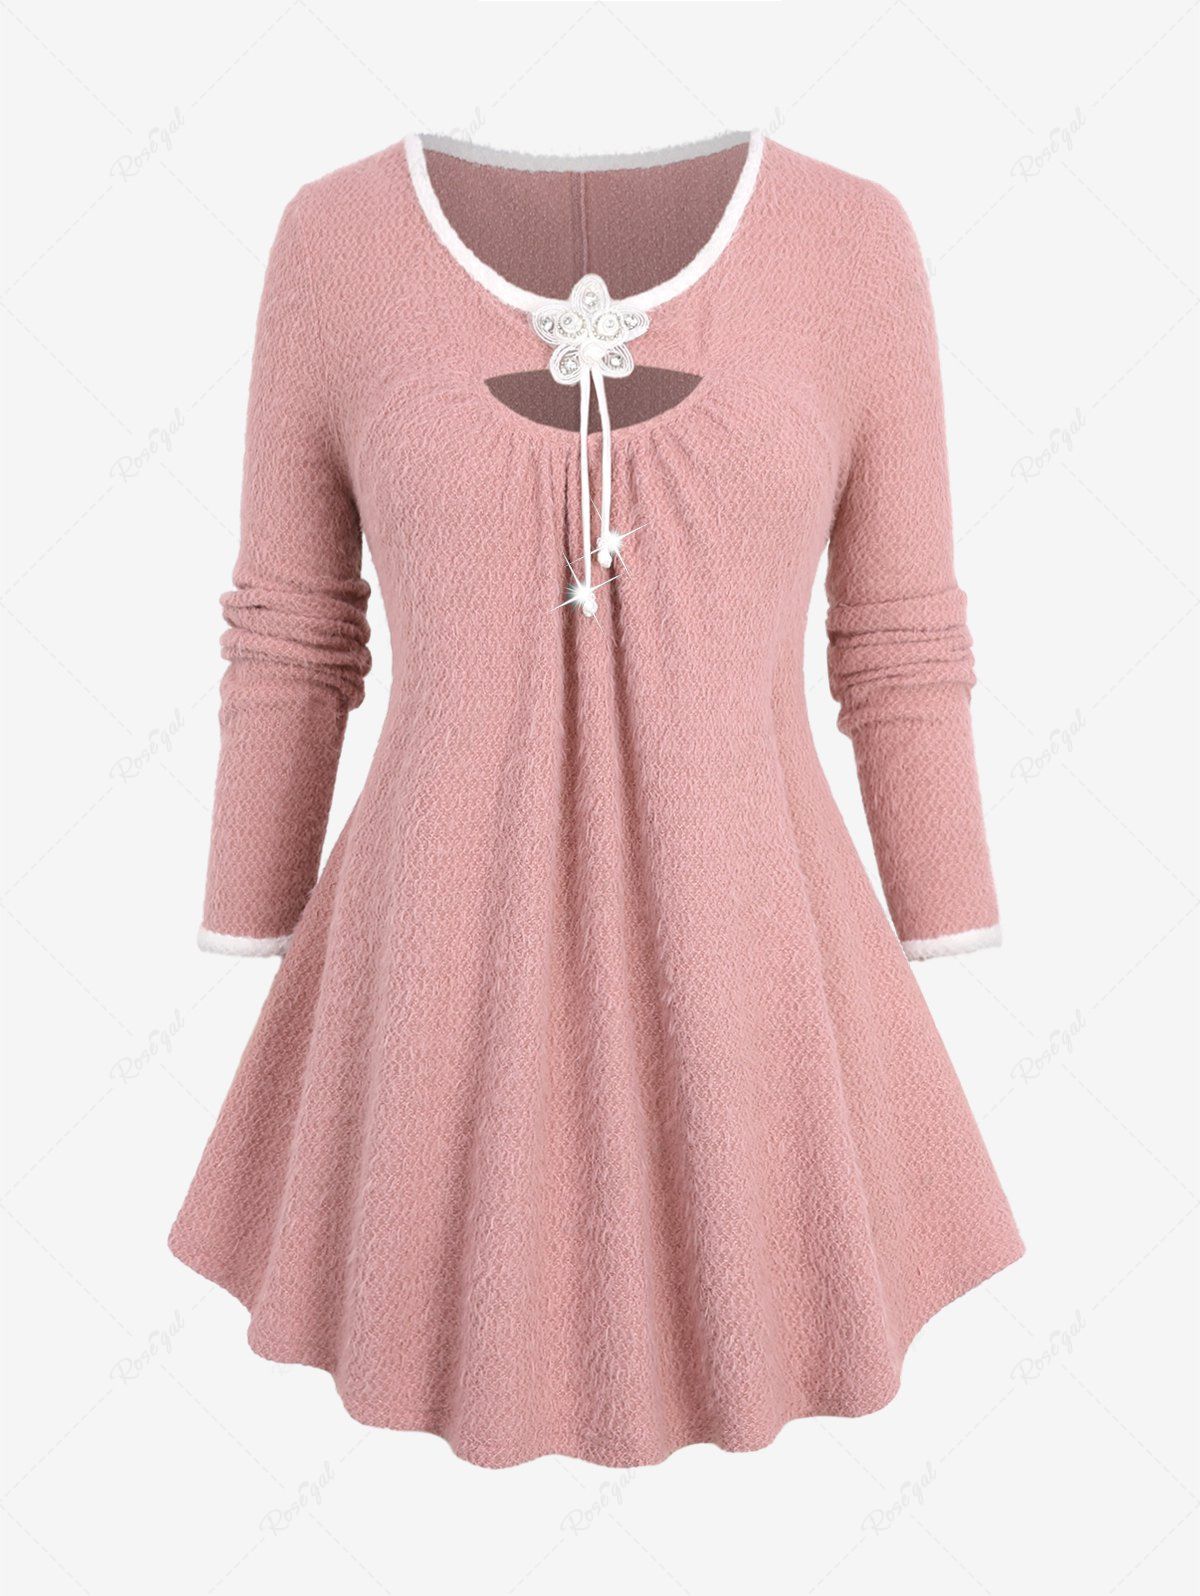 Trendy Plus Size Sparkling Glitter Floral Buckle Cut Out Panel Contrast Binding Long Sleeves Fluffy Pullover Knit Sweater  